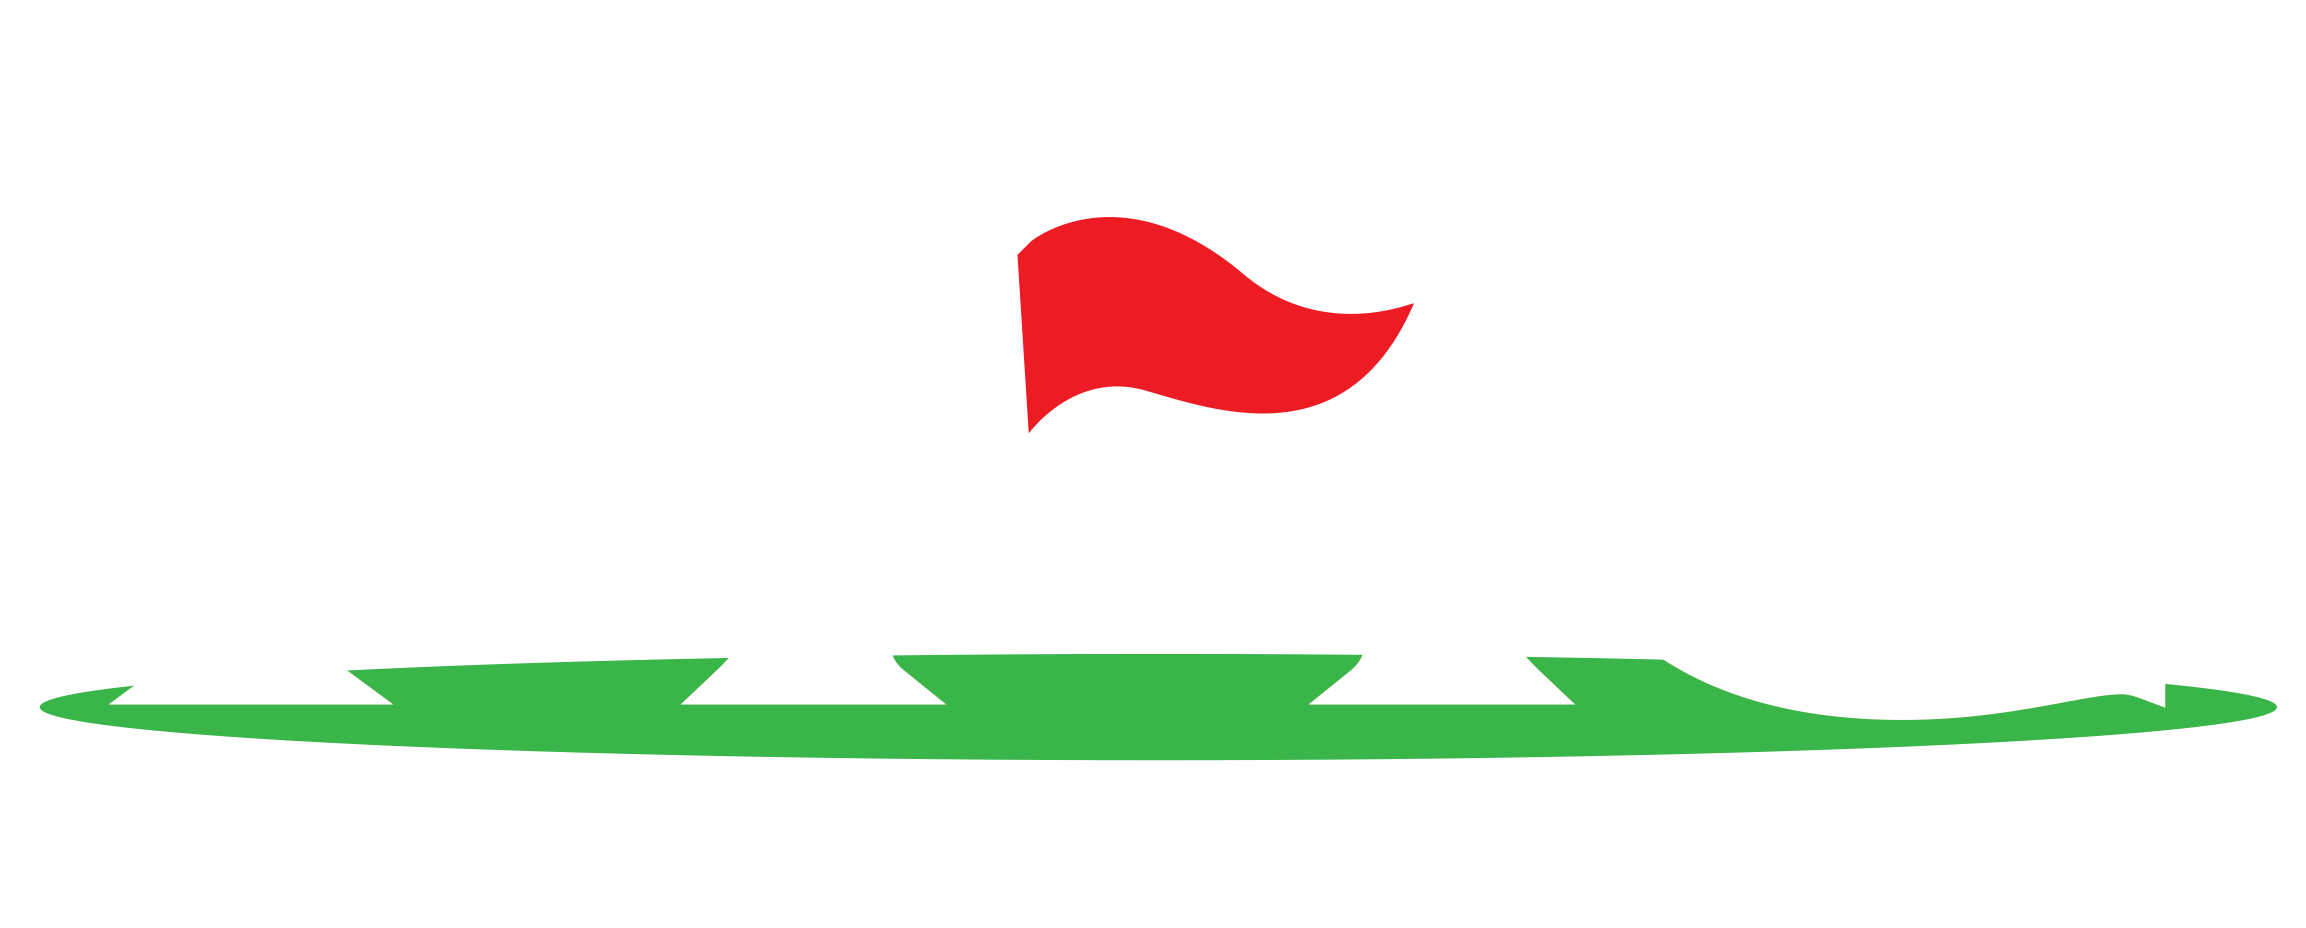 The Golf PAC Personal Accessory Caddie Logo